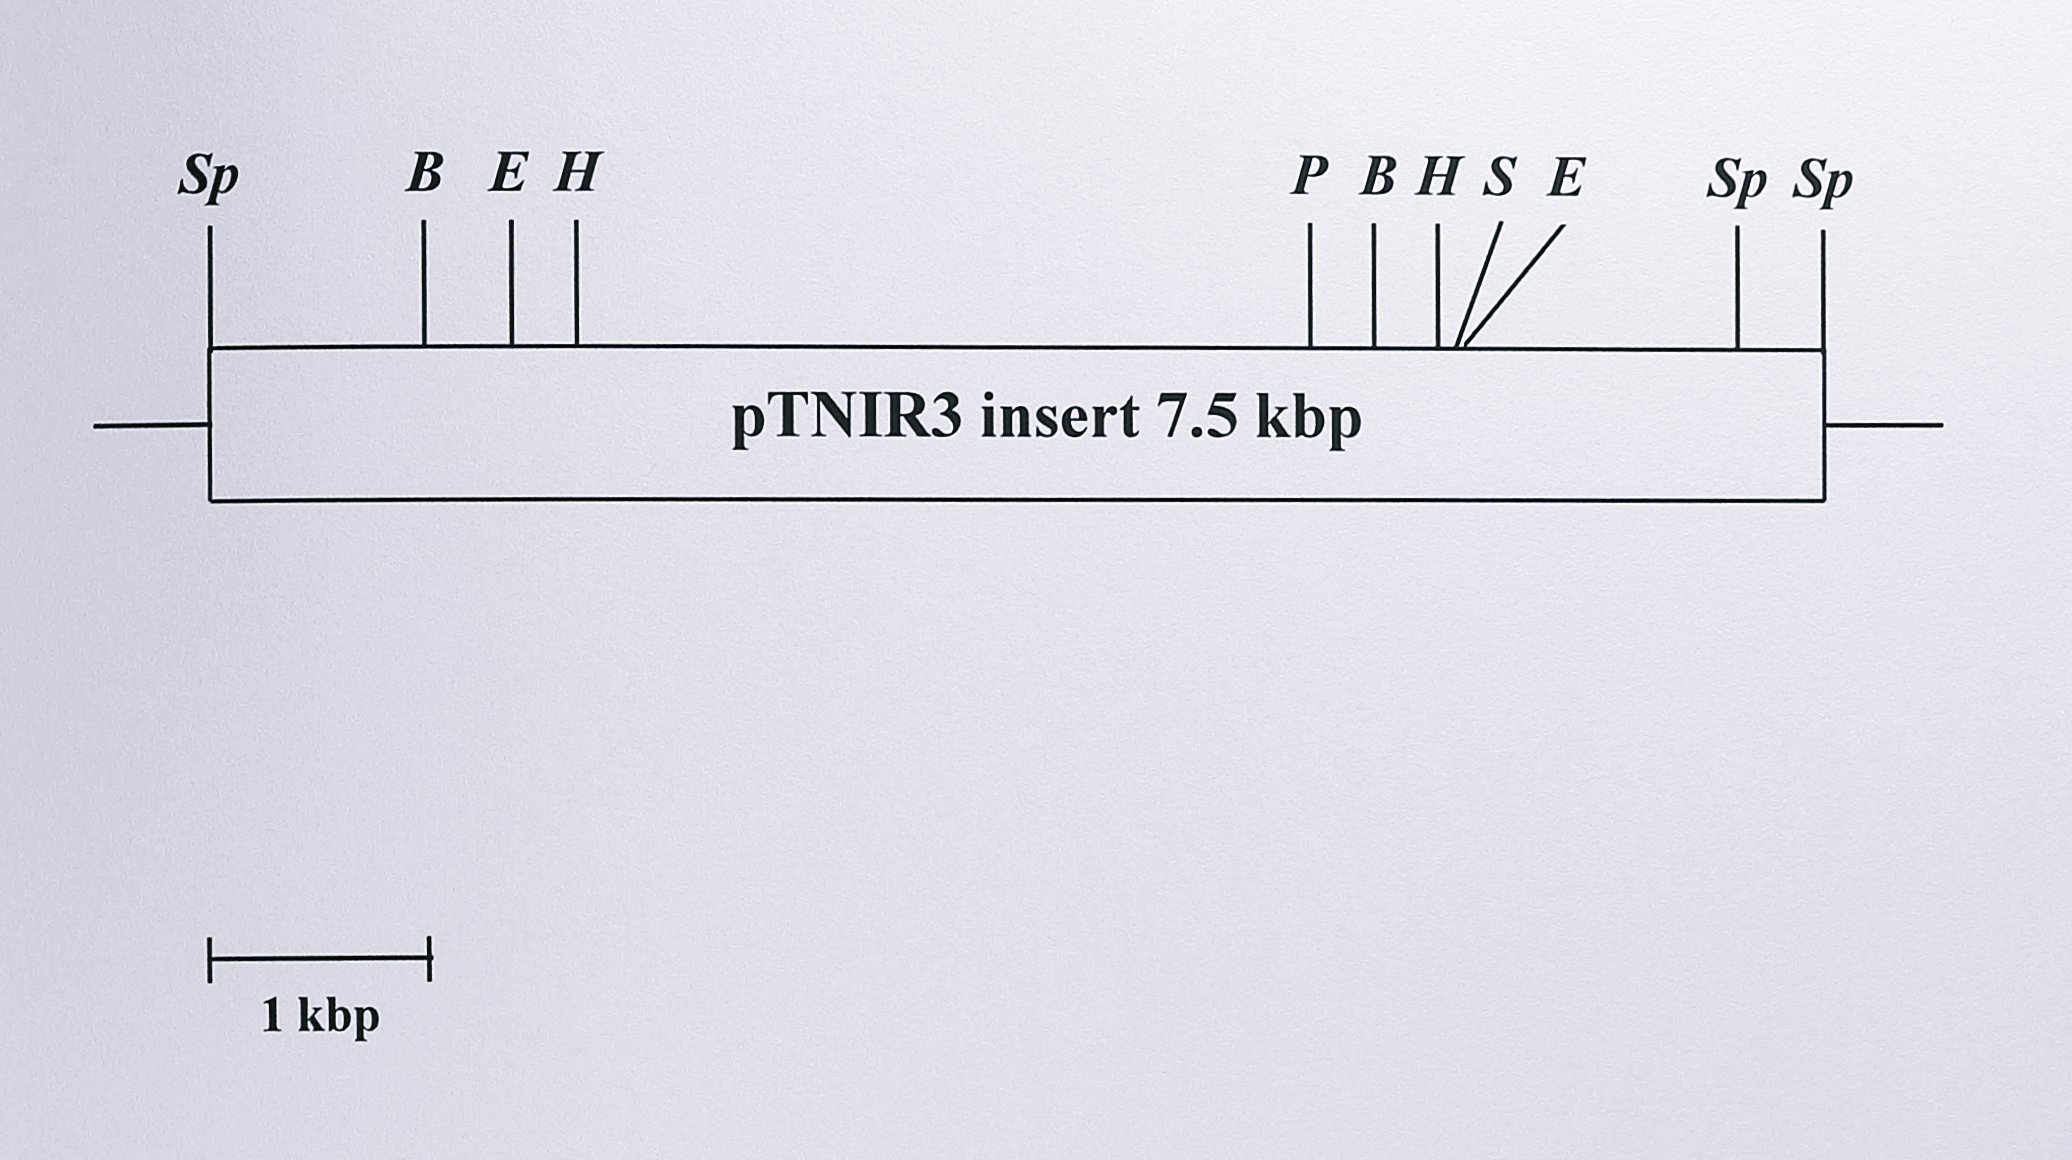 Physical map of the plasmid pTNIR3 produced using six restriction enzymes. Plasmid pTNIR3, containing the _nirS_ gene from _T. pantotropha_, was obtained from Thon de Boer, Vrije Universiteit, Amsterdam. It consists of a 7.5 kbp _SphI_ fragment of genomic DNA cloned in pGEM7zf (+). The plasmid was digested with 6 enzymes, both singly and in combination, and the fragments sized by agarose gel electrophoresis to generate the map. Enzyme abbreviations: Sp, _SphI_; B, _BamHI_; E, _EcoRI_; H, _HindIII_; P, _PstI_; S, _SalI_